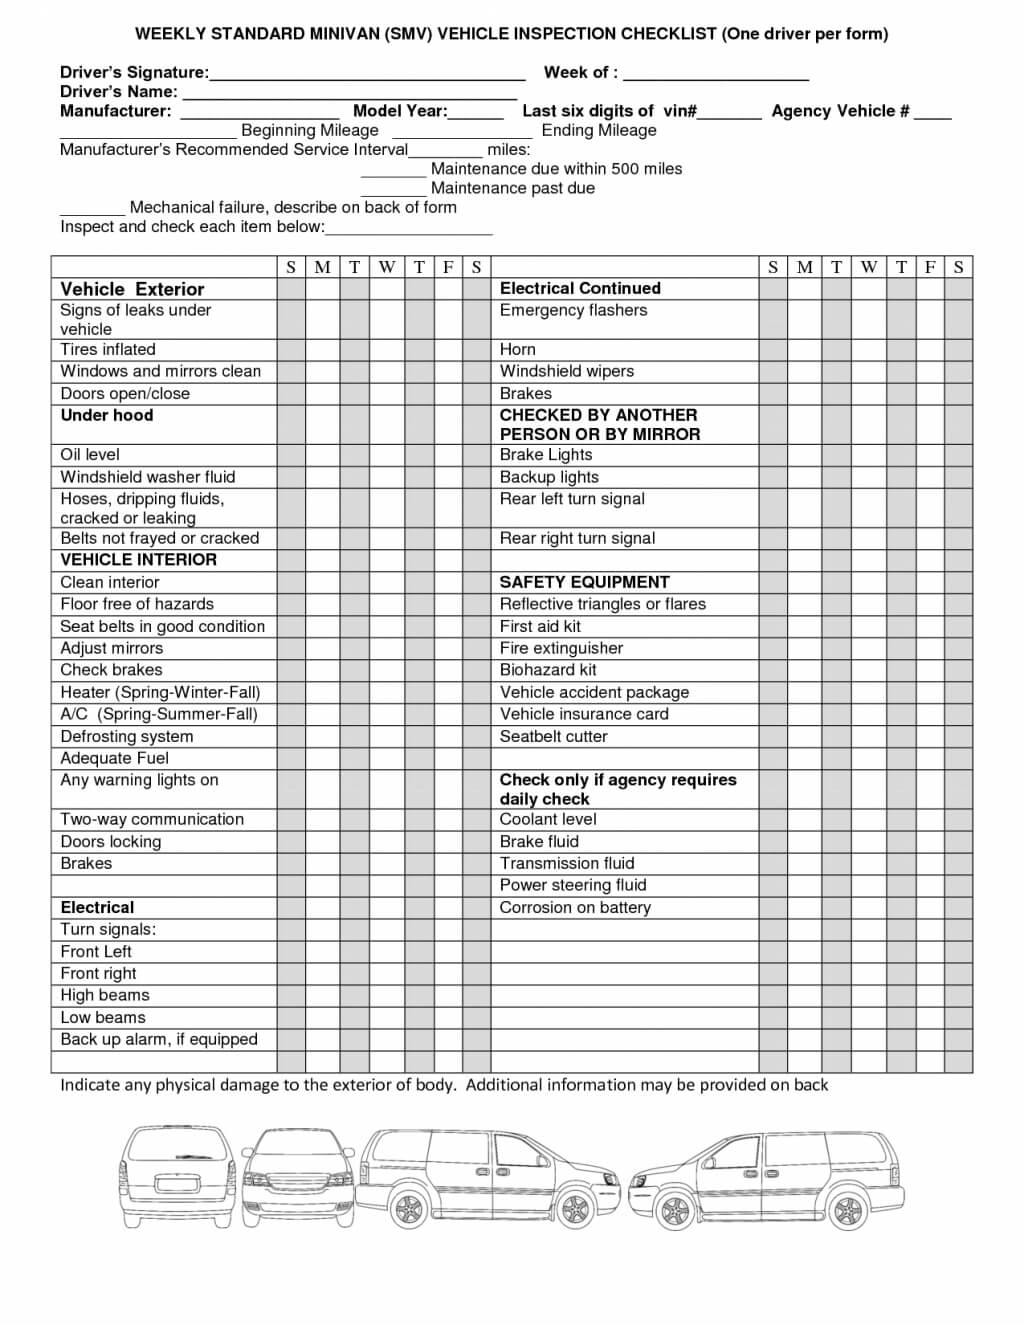 Weekly Vehicle Inspection Report Template | Meetpaulryan With Daily Inspection Report Template